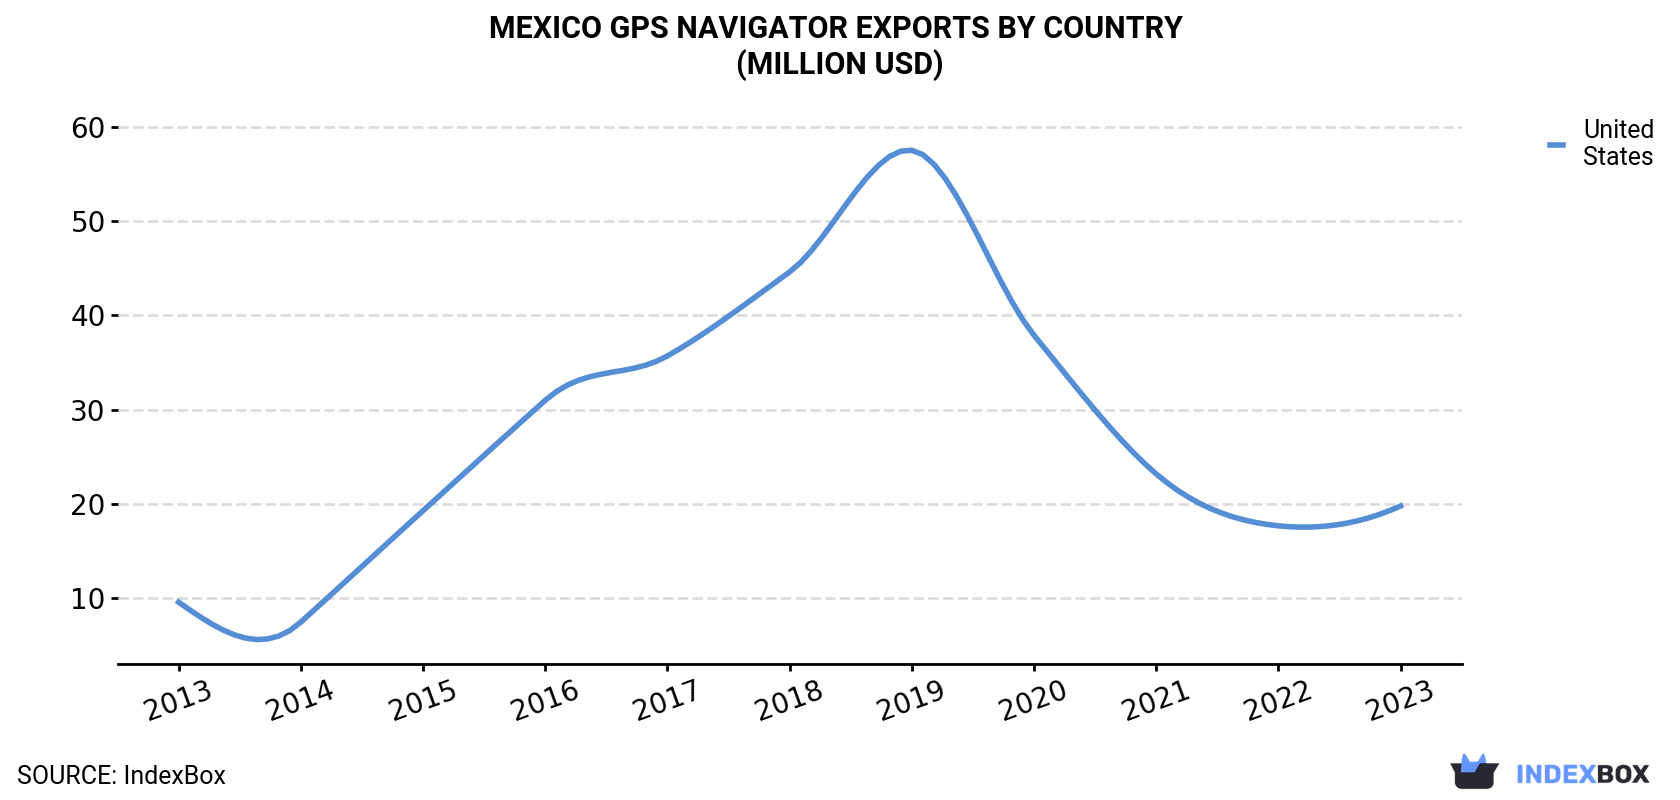 Mexico GPS Navigator Exports By Country (Million USD)